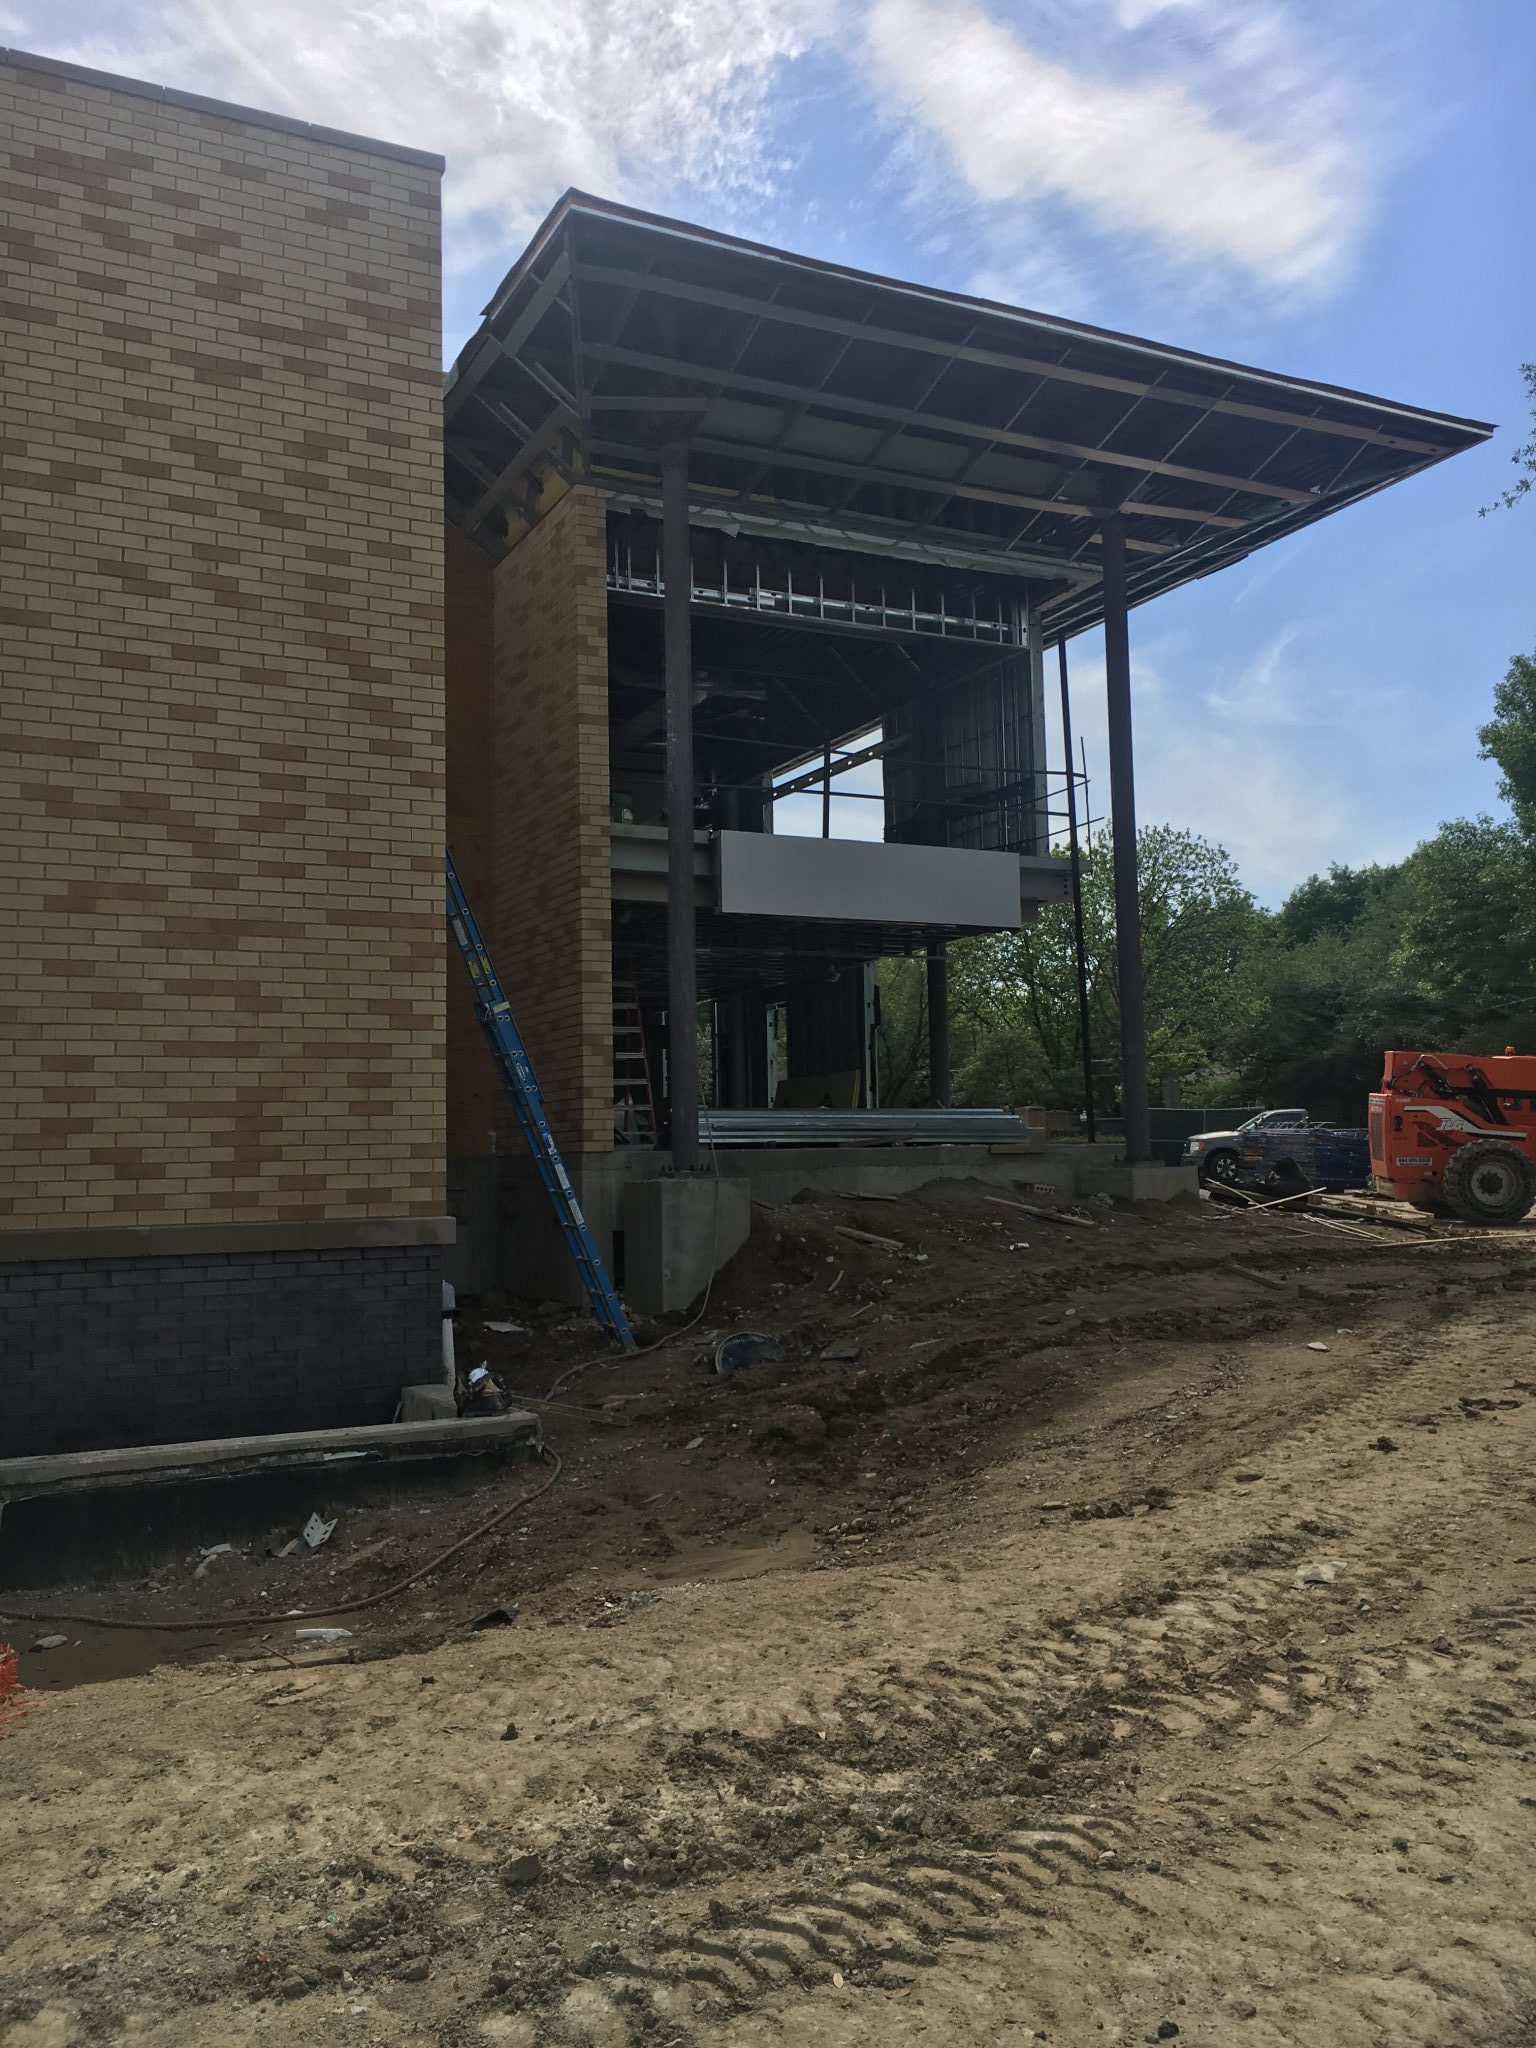 Lakehill Prep's new addition was completed for the 2017-18 school year. This photo was taken in April when construction was still in progress. (Photo by Emily Charrier)